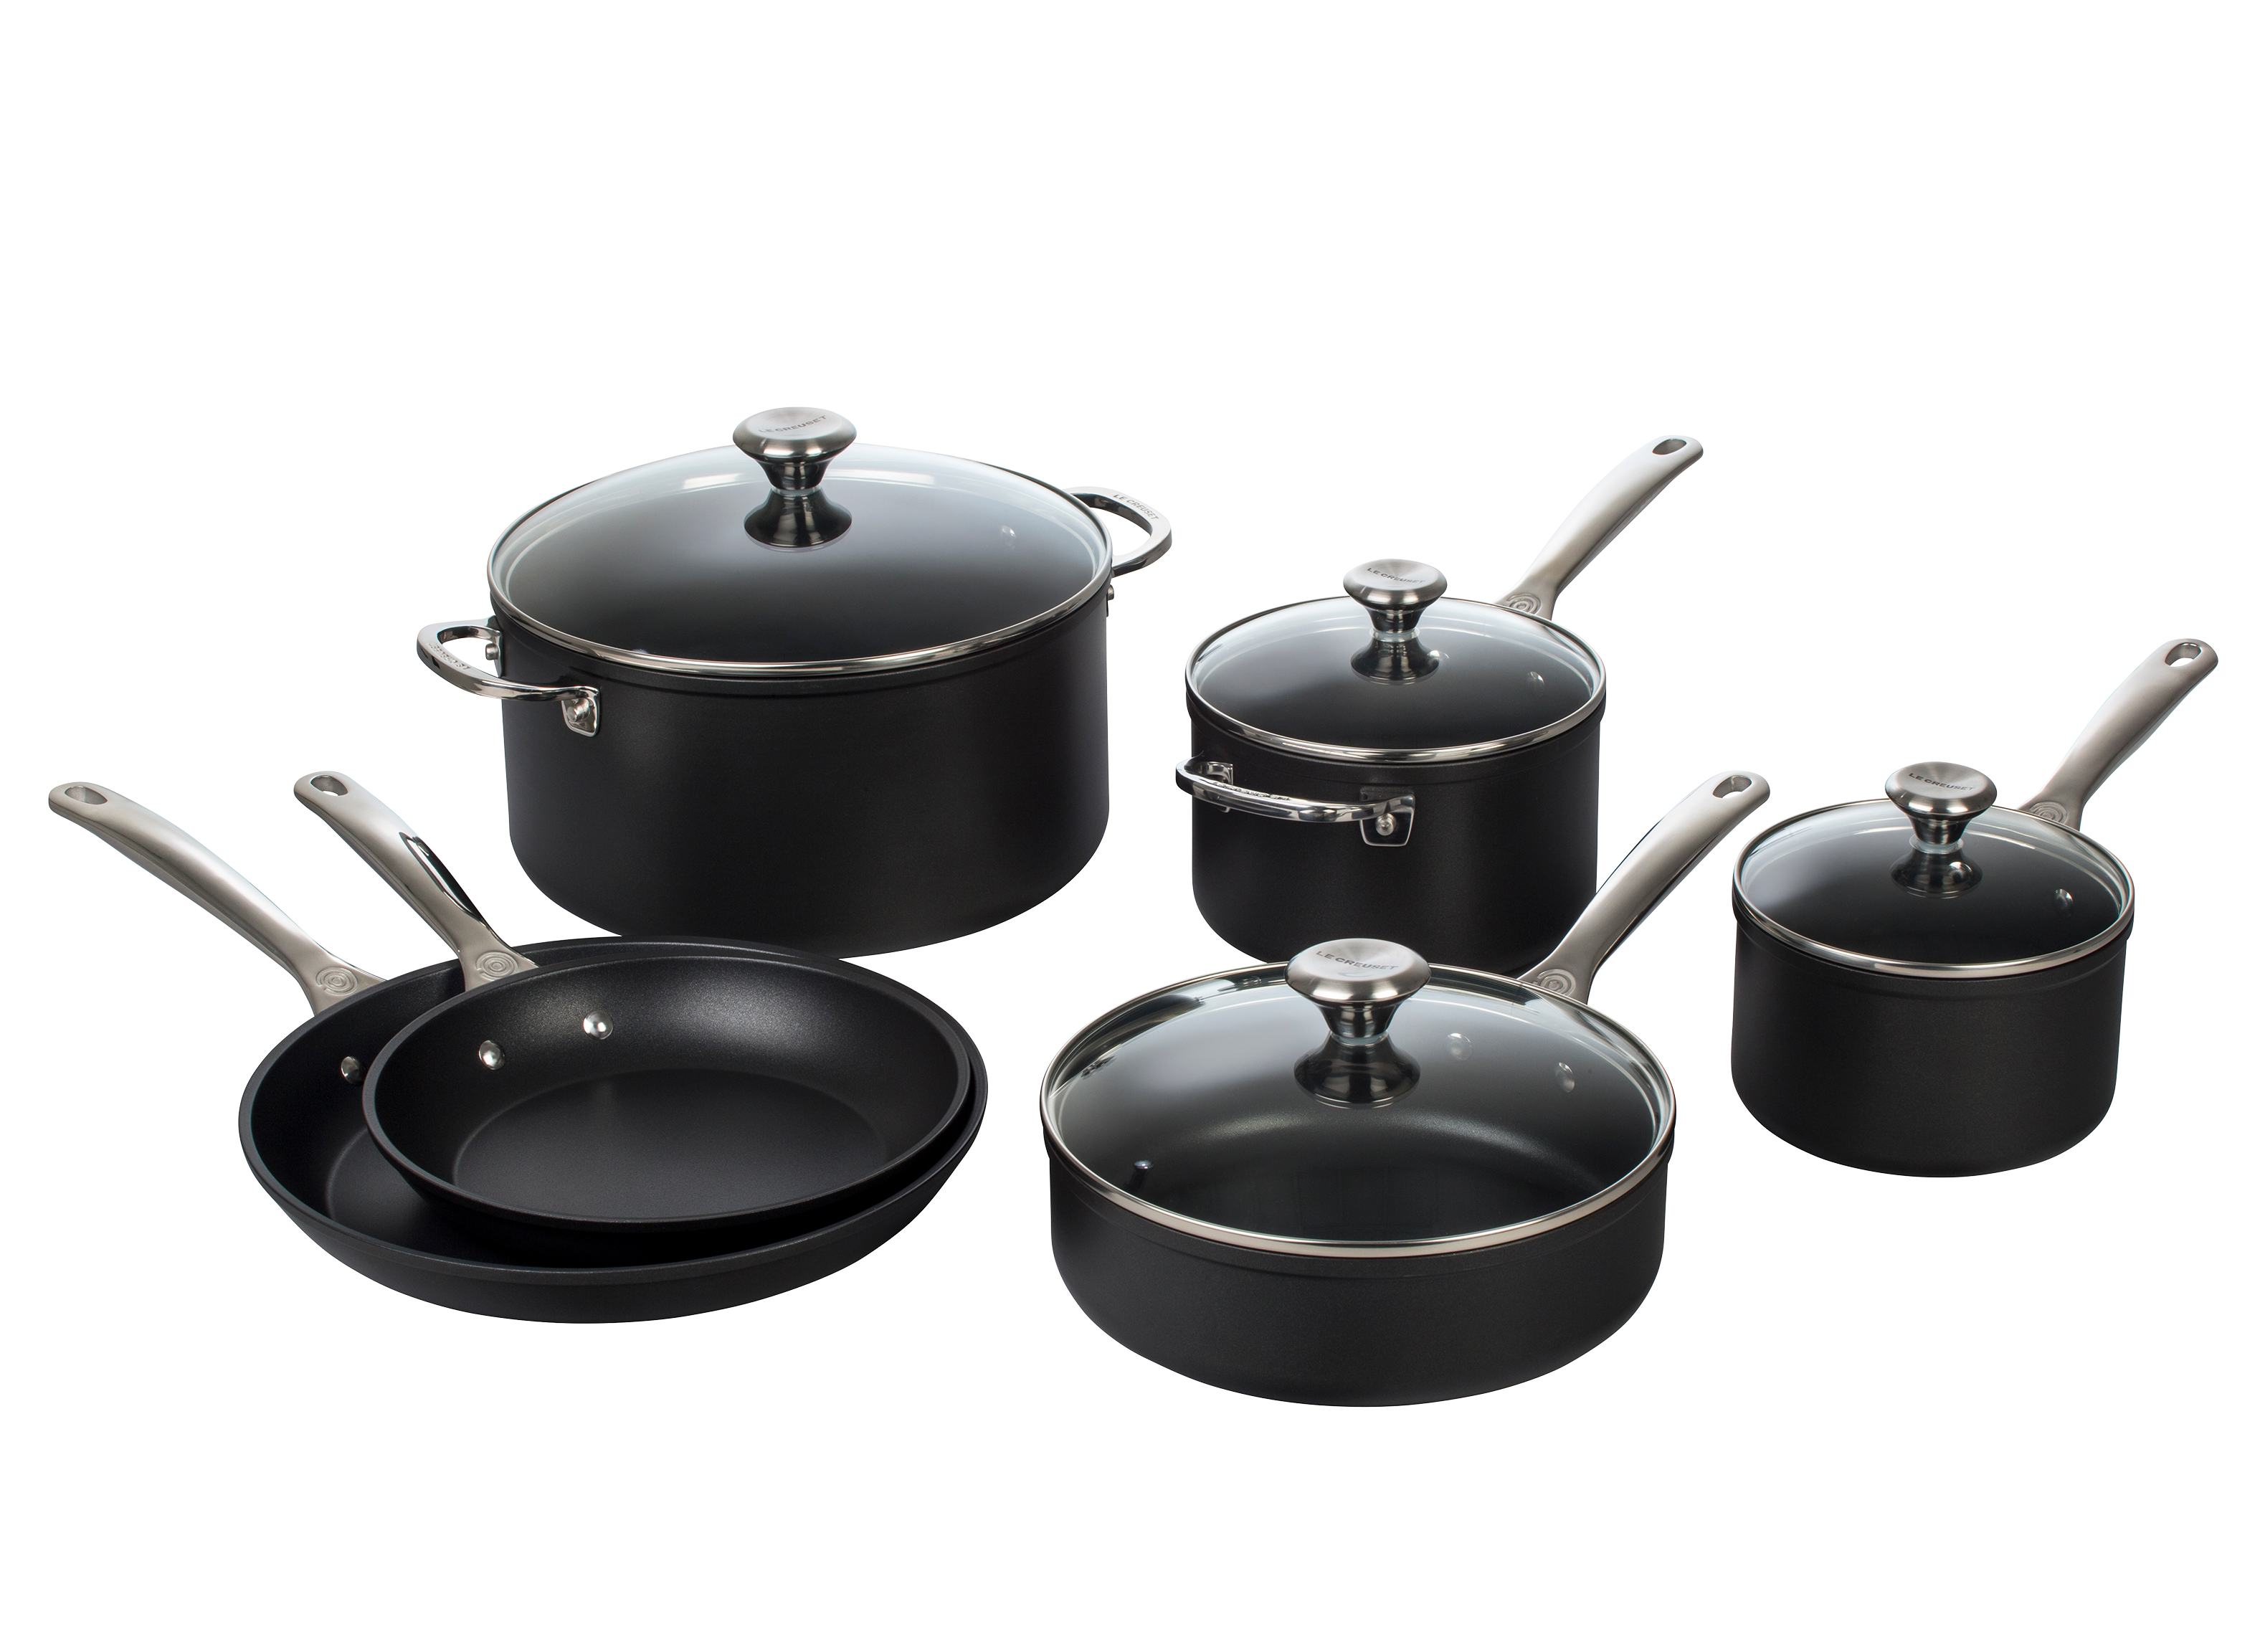 https://crdms.images.consumerreports.org/prod/products/cr/models/404677-cookware-sets-nonstick-le-creuset-toughened-pro-10pc-10023927.png